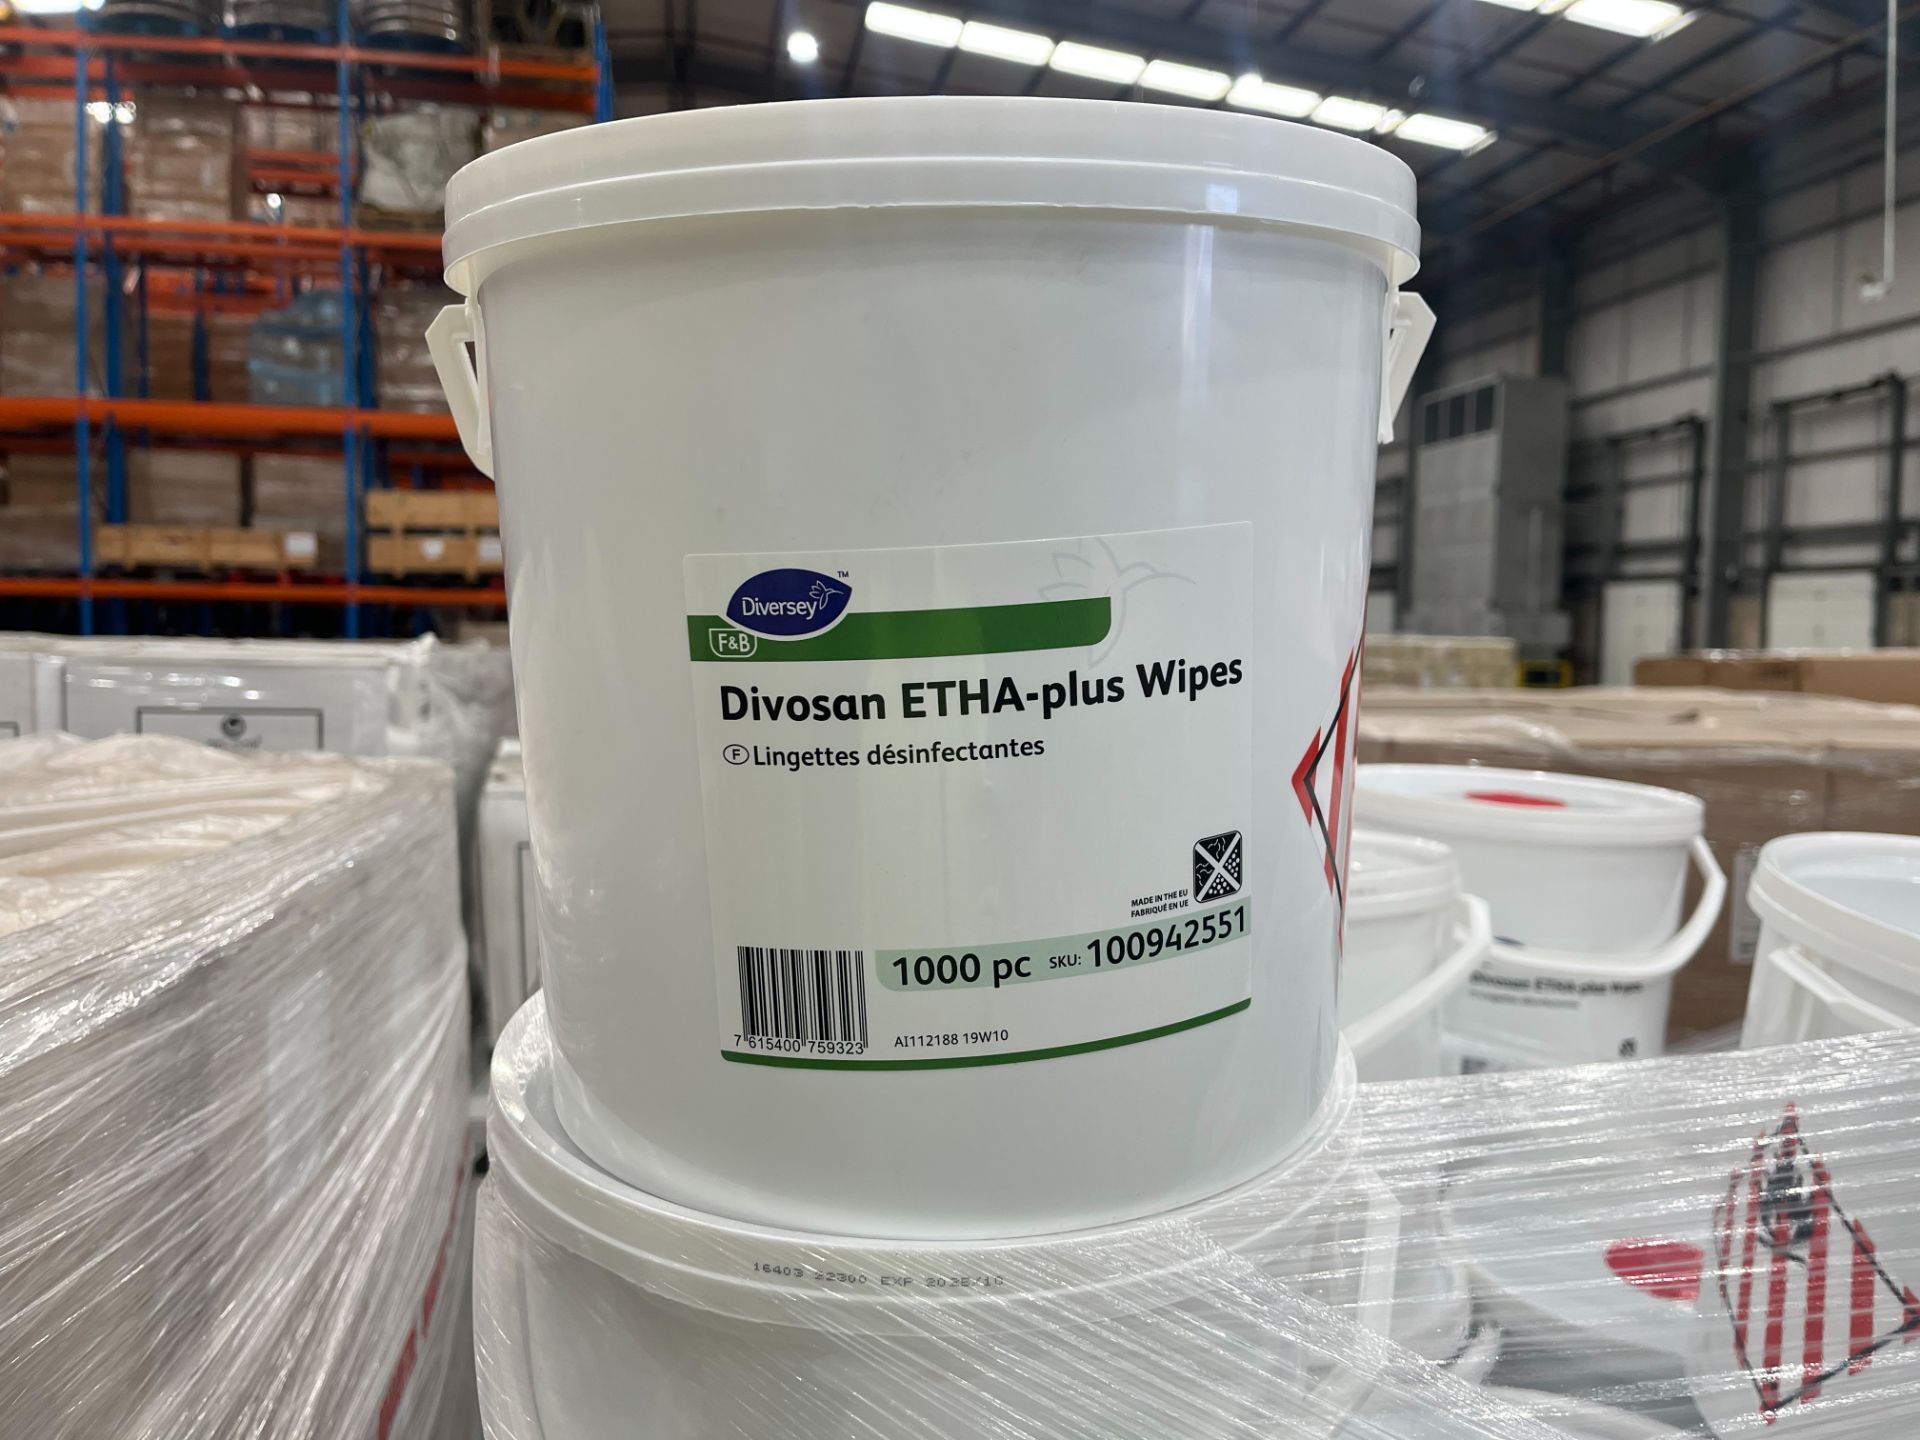 TRADE PALLET TO CONTAIN 54x BRAND NEW DIVERSY 1000pc Divosan ETHA-Plus Wipes